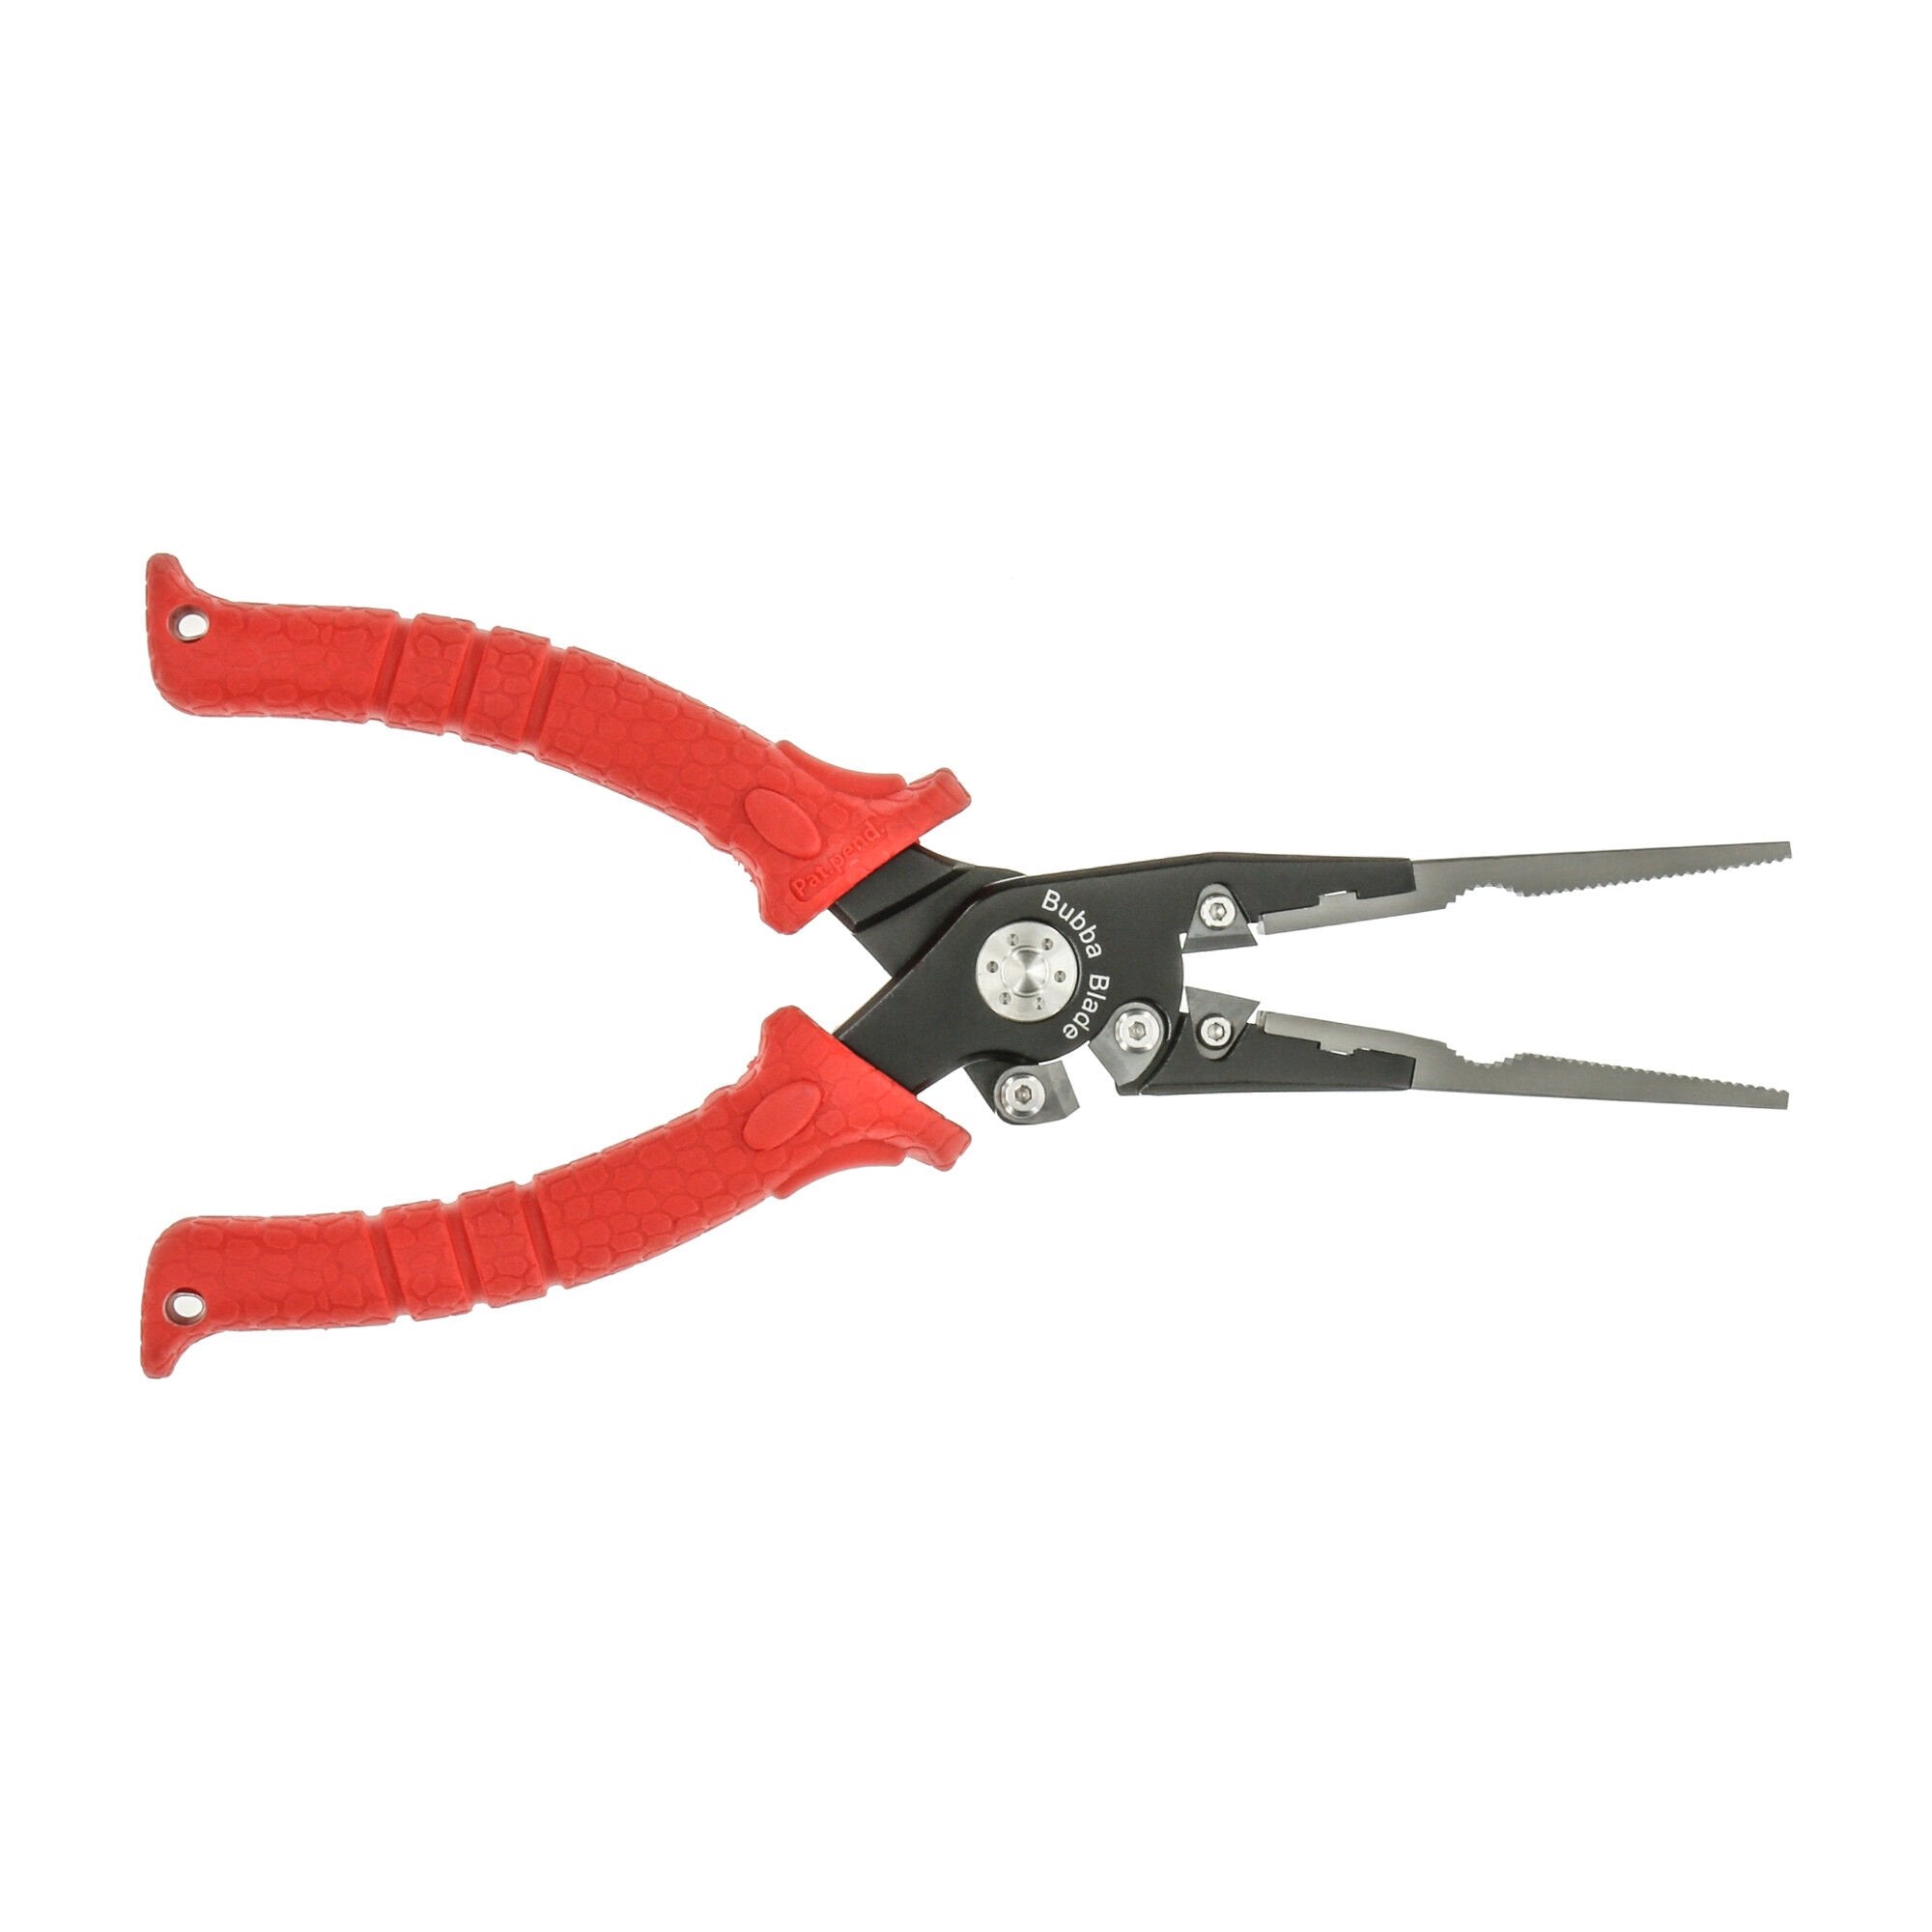 BUBBA BLADE 7 Stainless Steel Wire Cutters from BUBBA BLADE - CHAOS Fishing